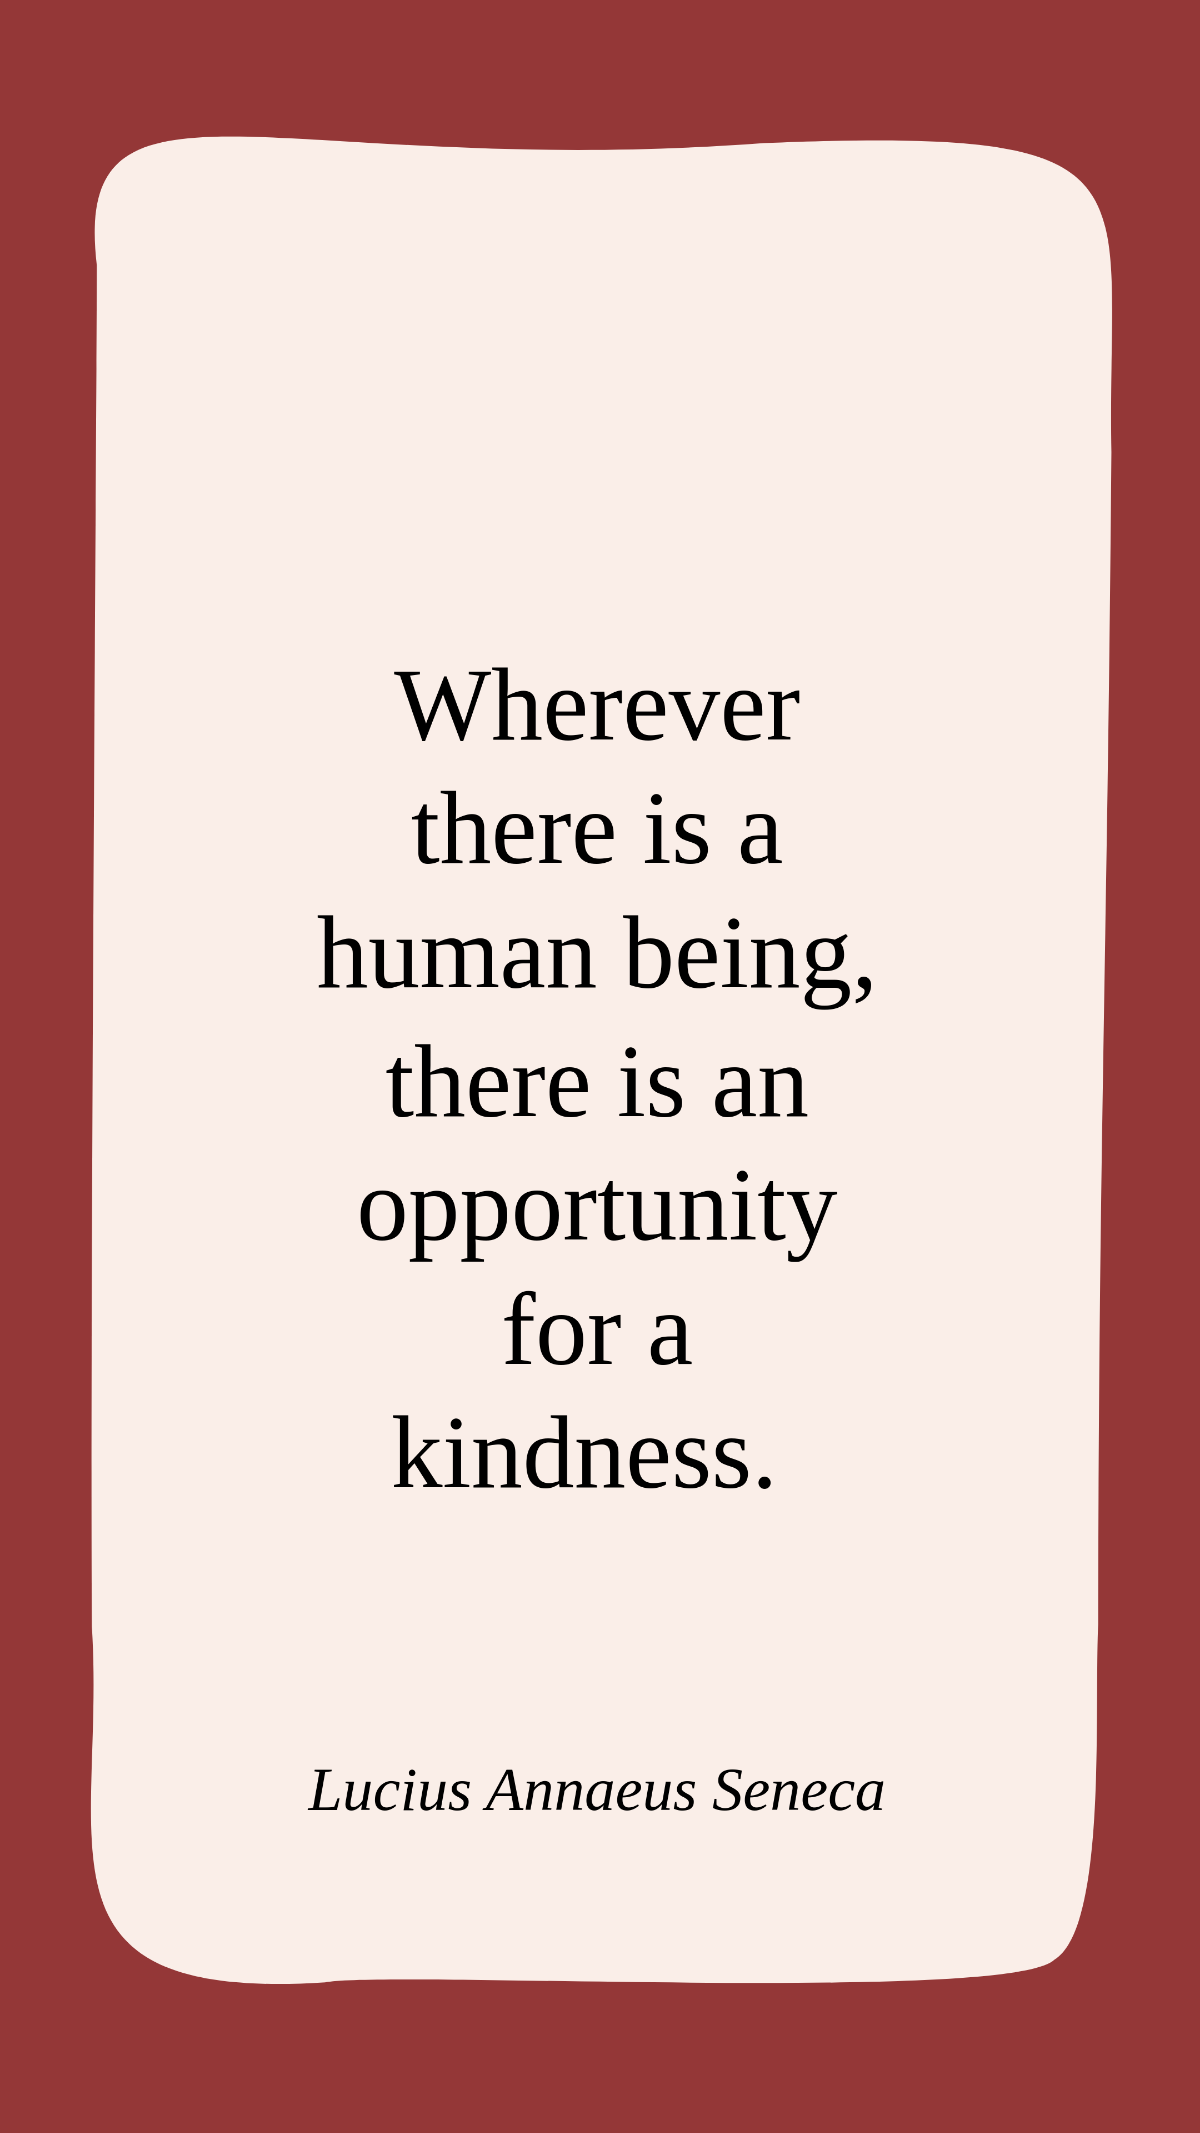 Lucius Annaeus Seneca - Wherever there is a human being, there is an opportunity for a kindness.